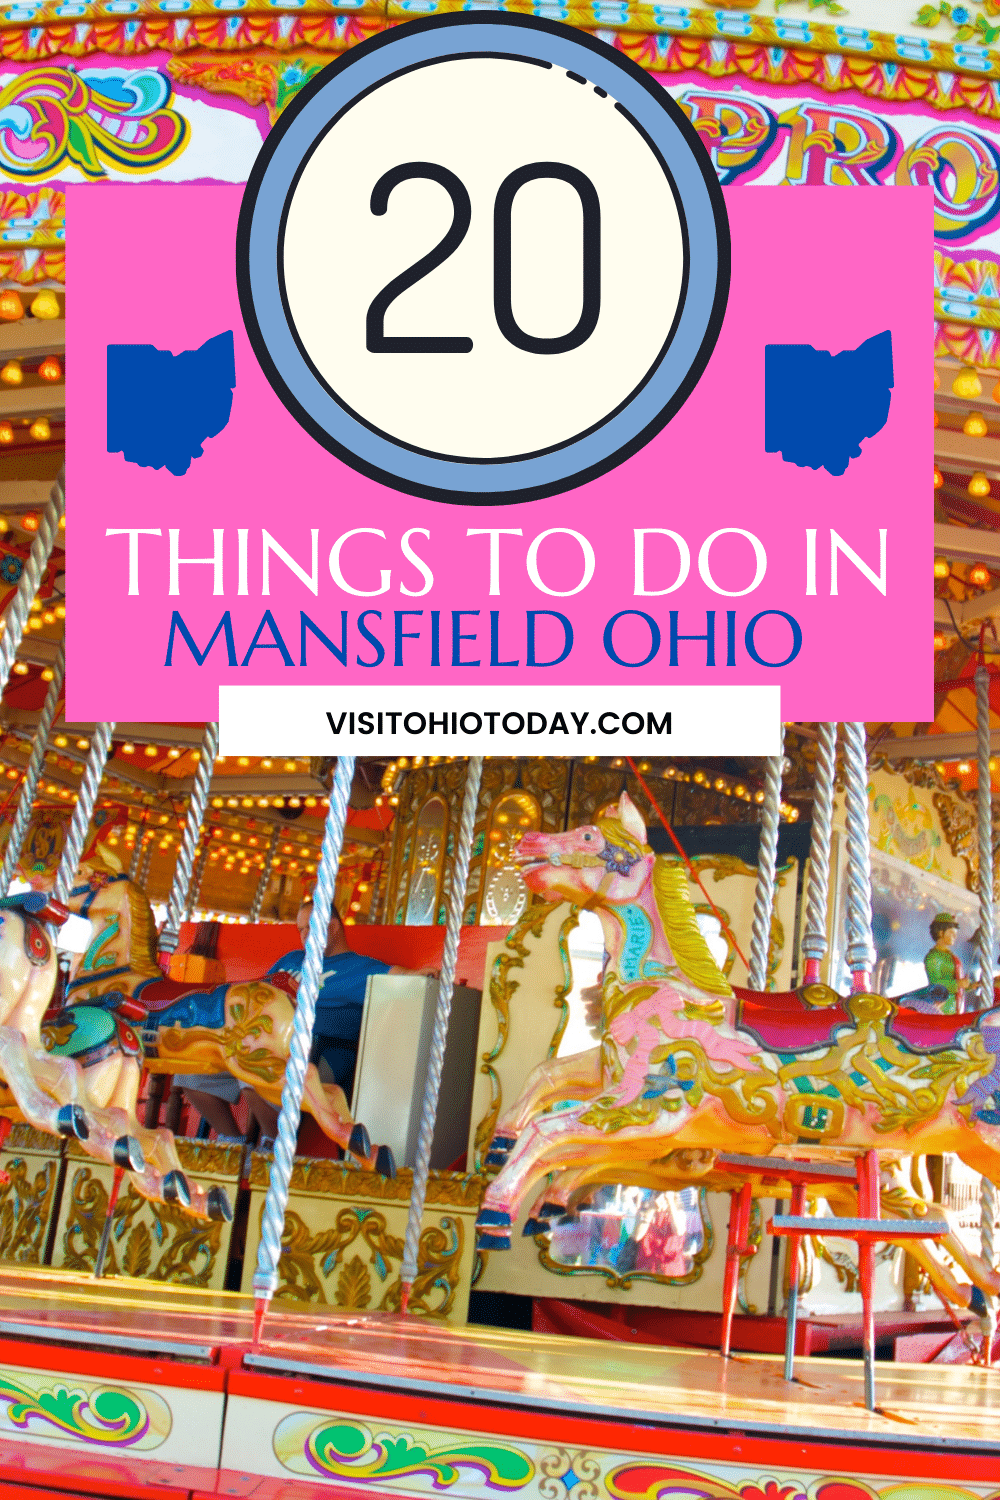 Looking for things to do in Mansfield Ohio? We have over 20 fun and some unusual activities for you while you are in the area!  #MansfieldOhio #shawshank #shawshankredemption #ohioreformatory #visitohio #ohio